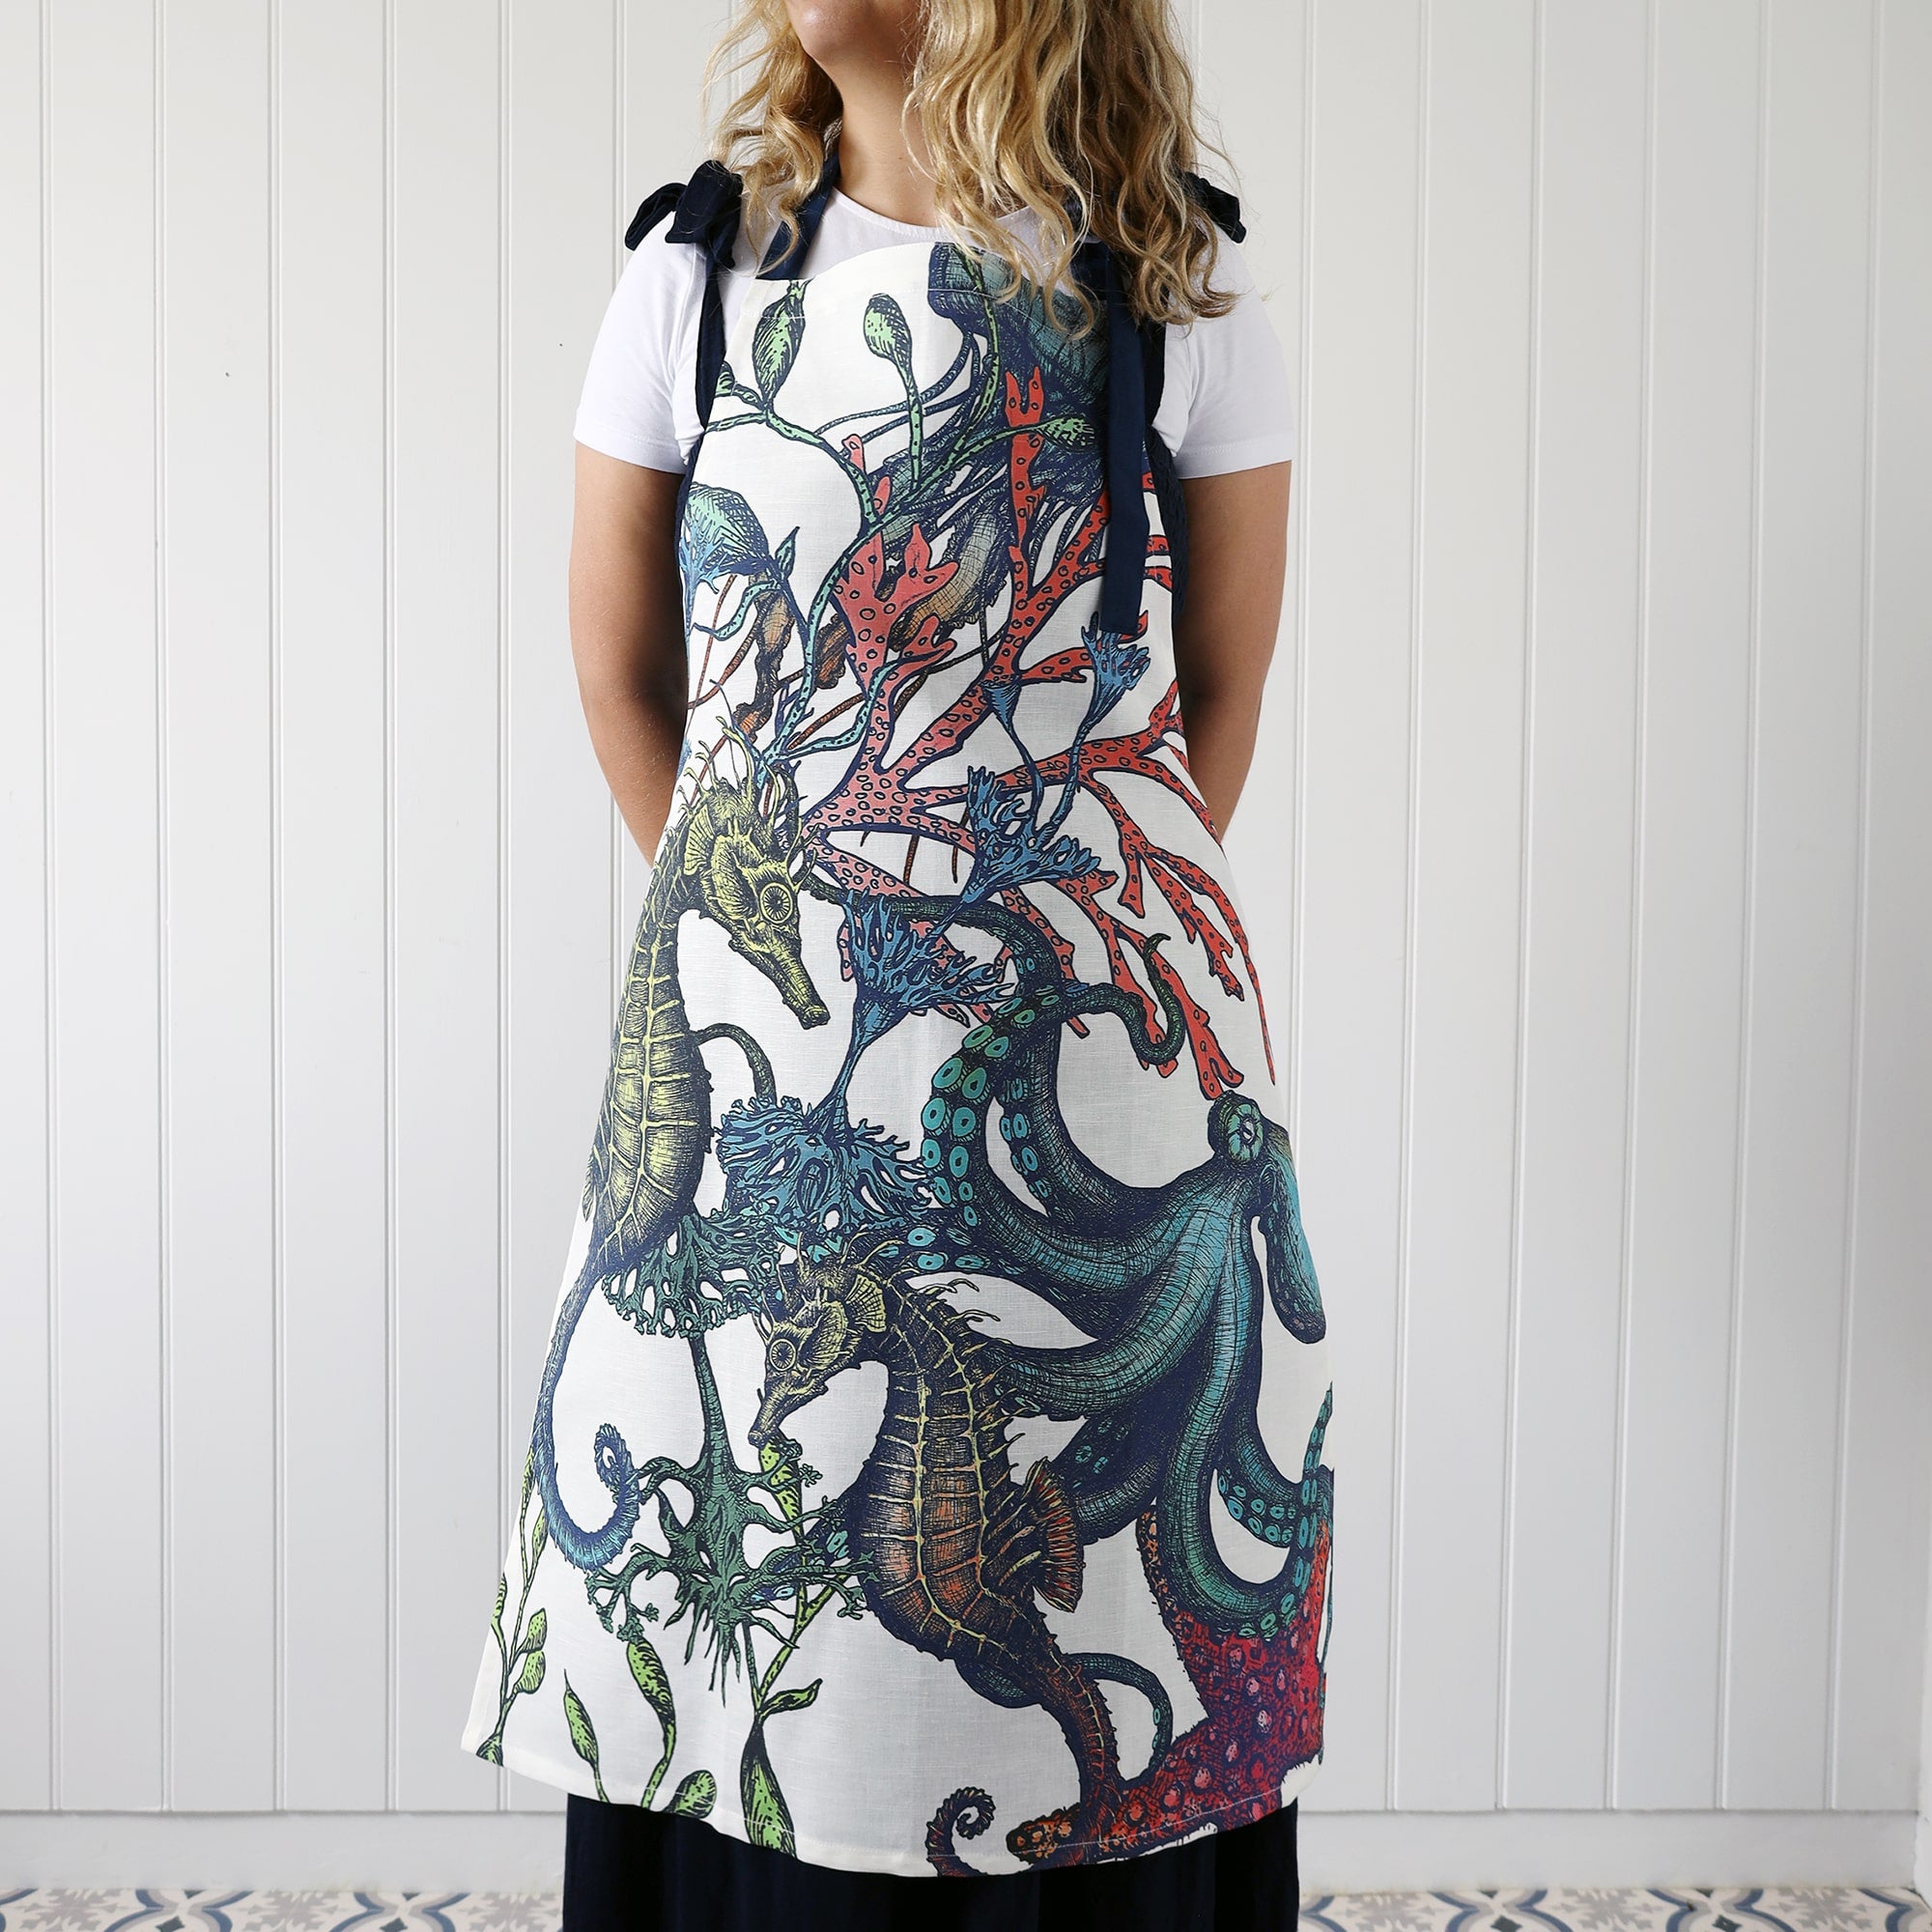 Our reef apron being worn by a model